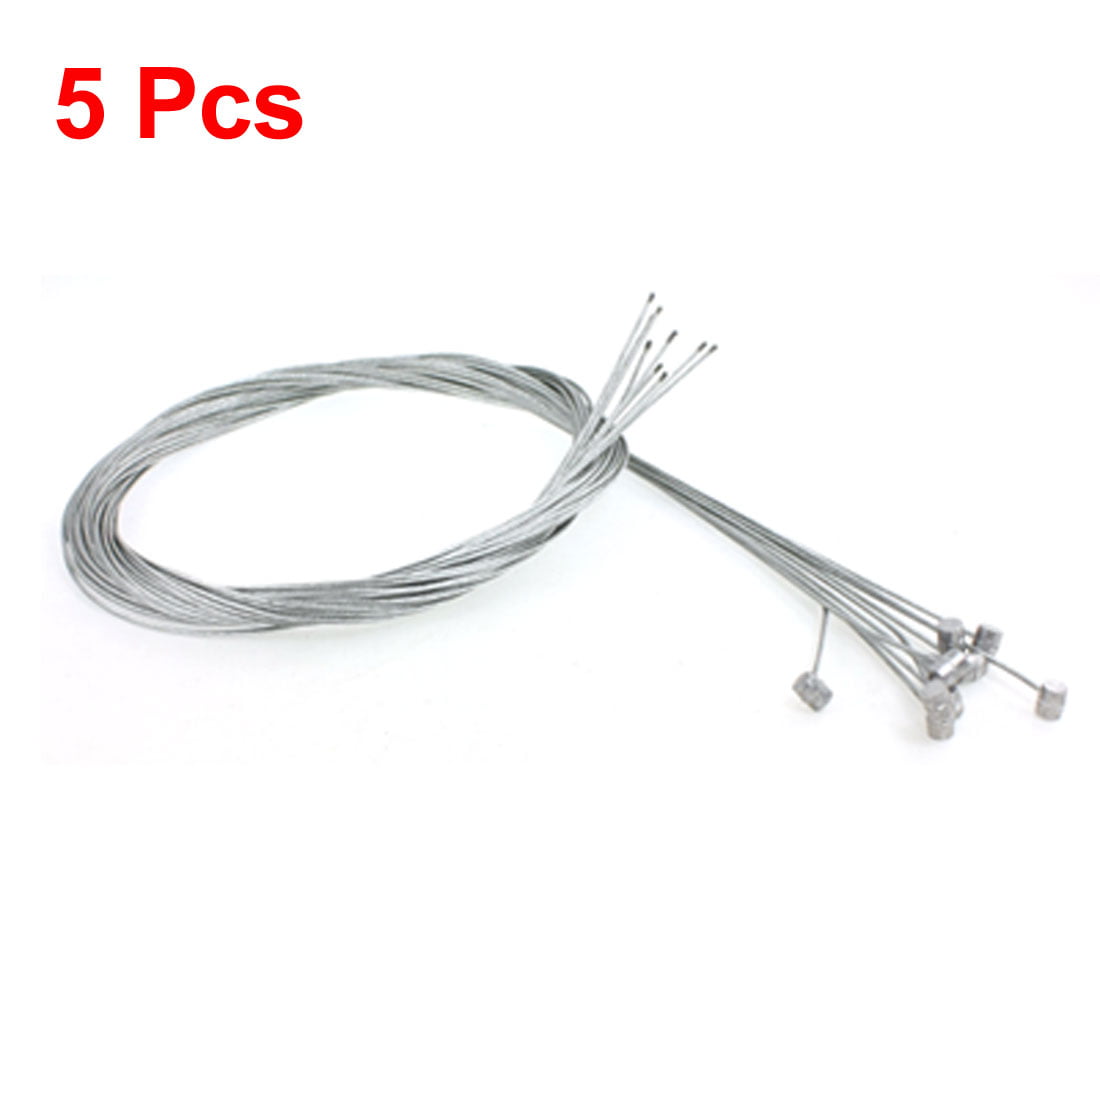 2m Mountain Road Bike Fixed Gear Bicycle Shifter Line Shift inner Cable 2pcs 